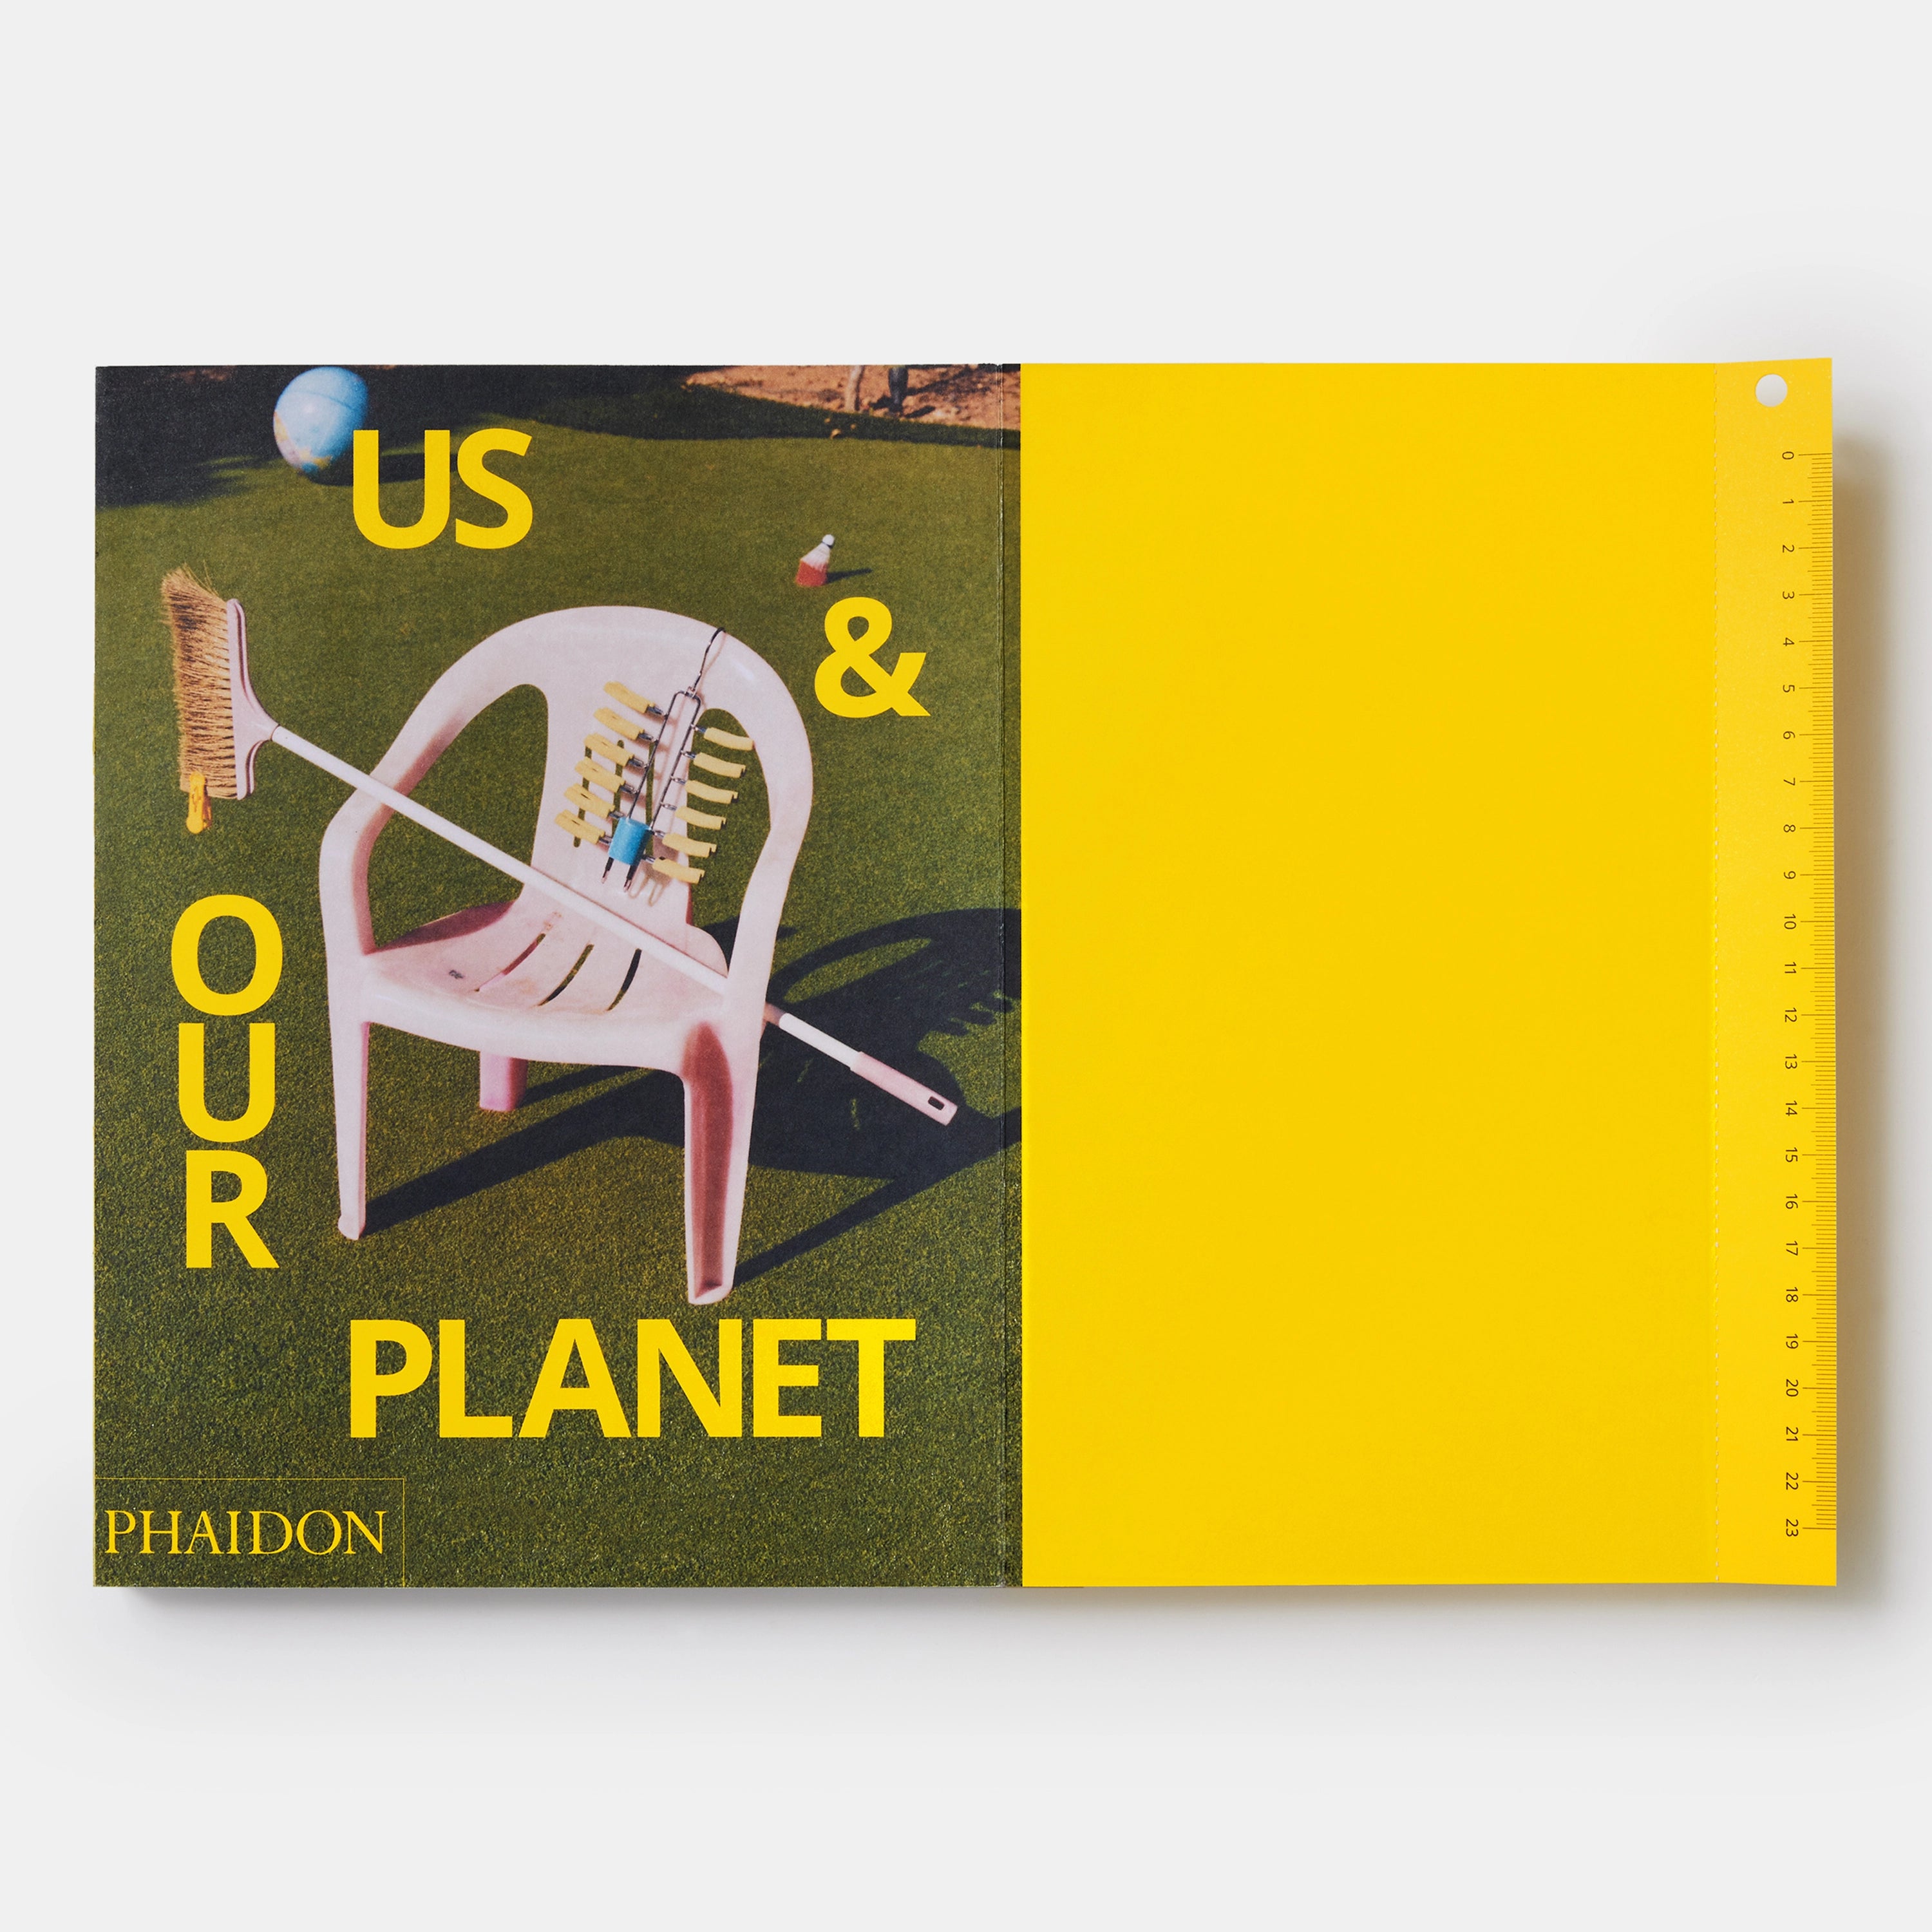 Us & Our Planet: This is How We Live [IKEA]